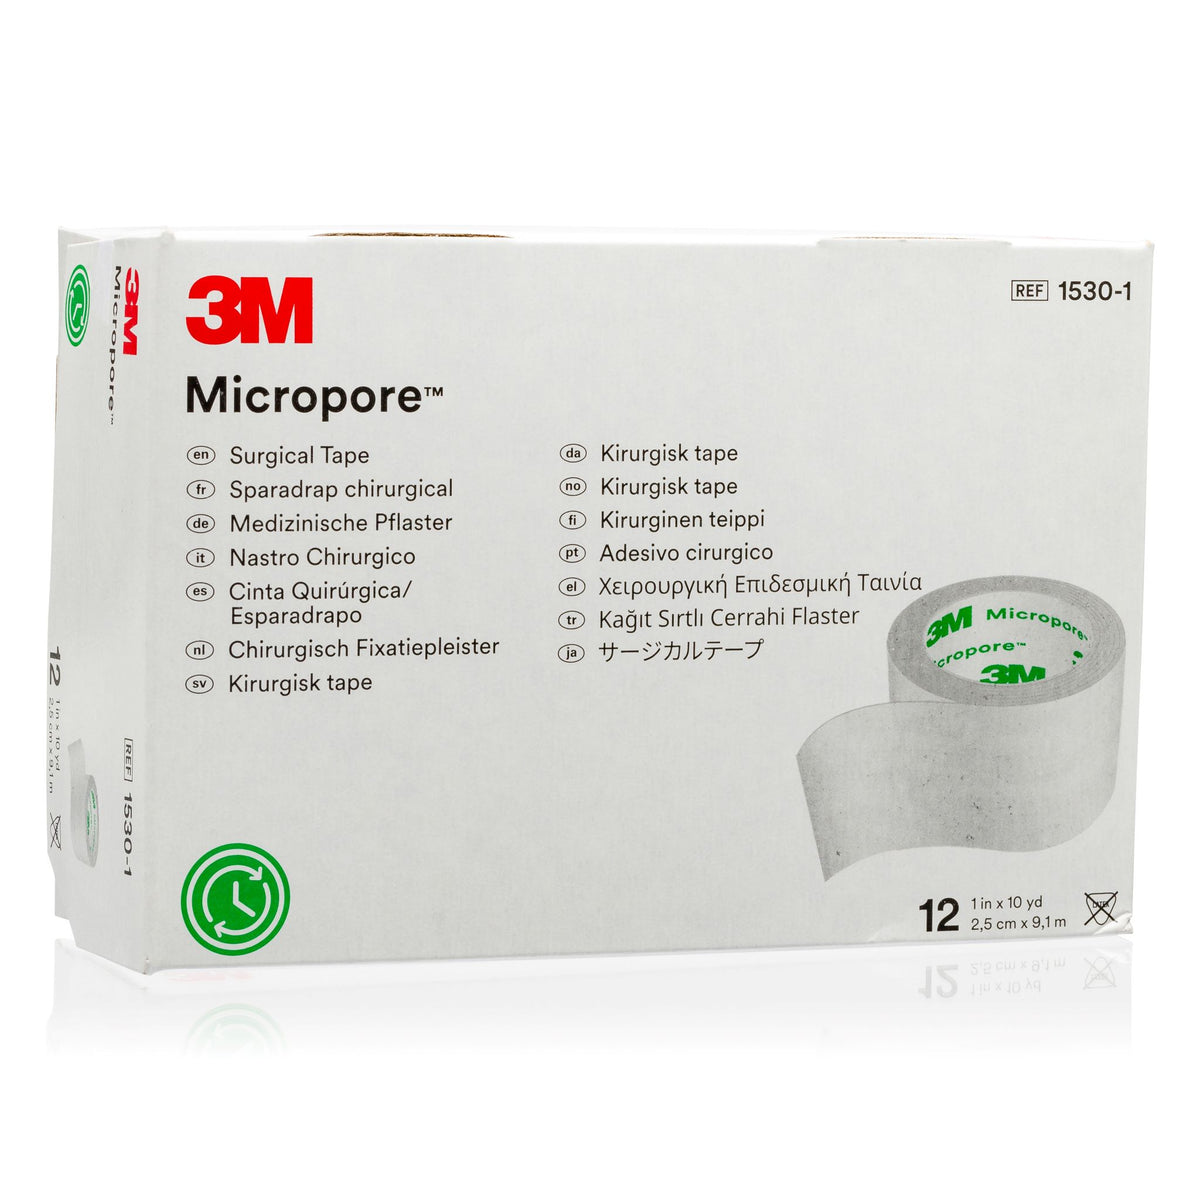 3M Micropore (Paper) Surgical Tape – 1 (1 ROLL) – Ultimate Tattoo Supply